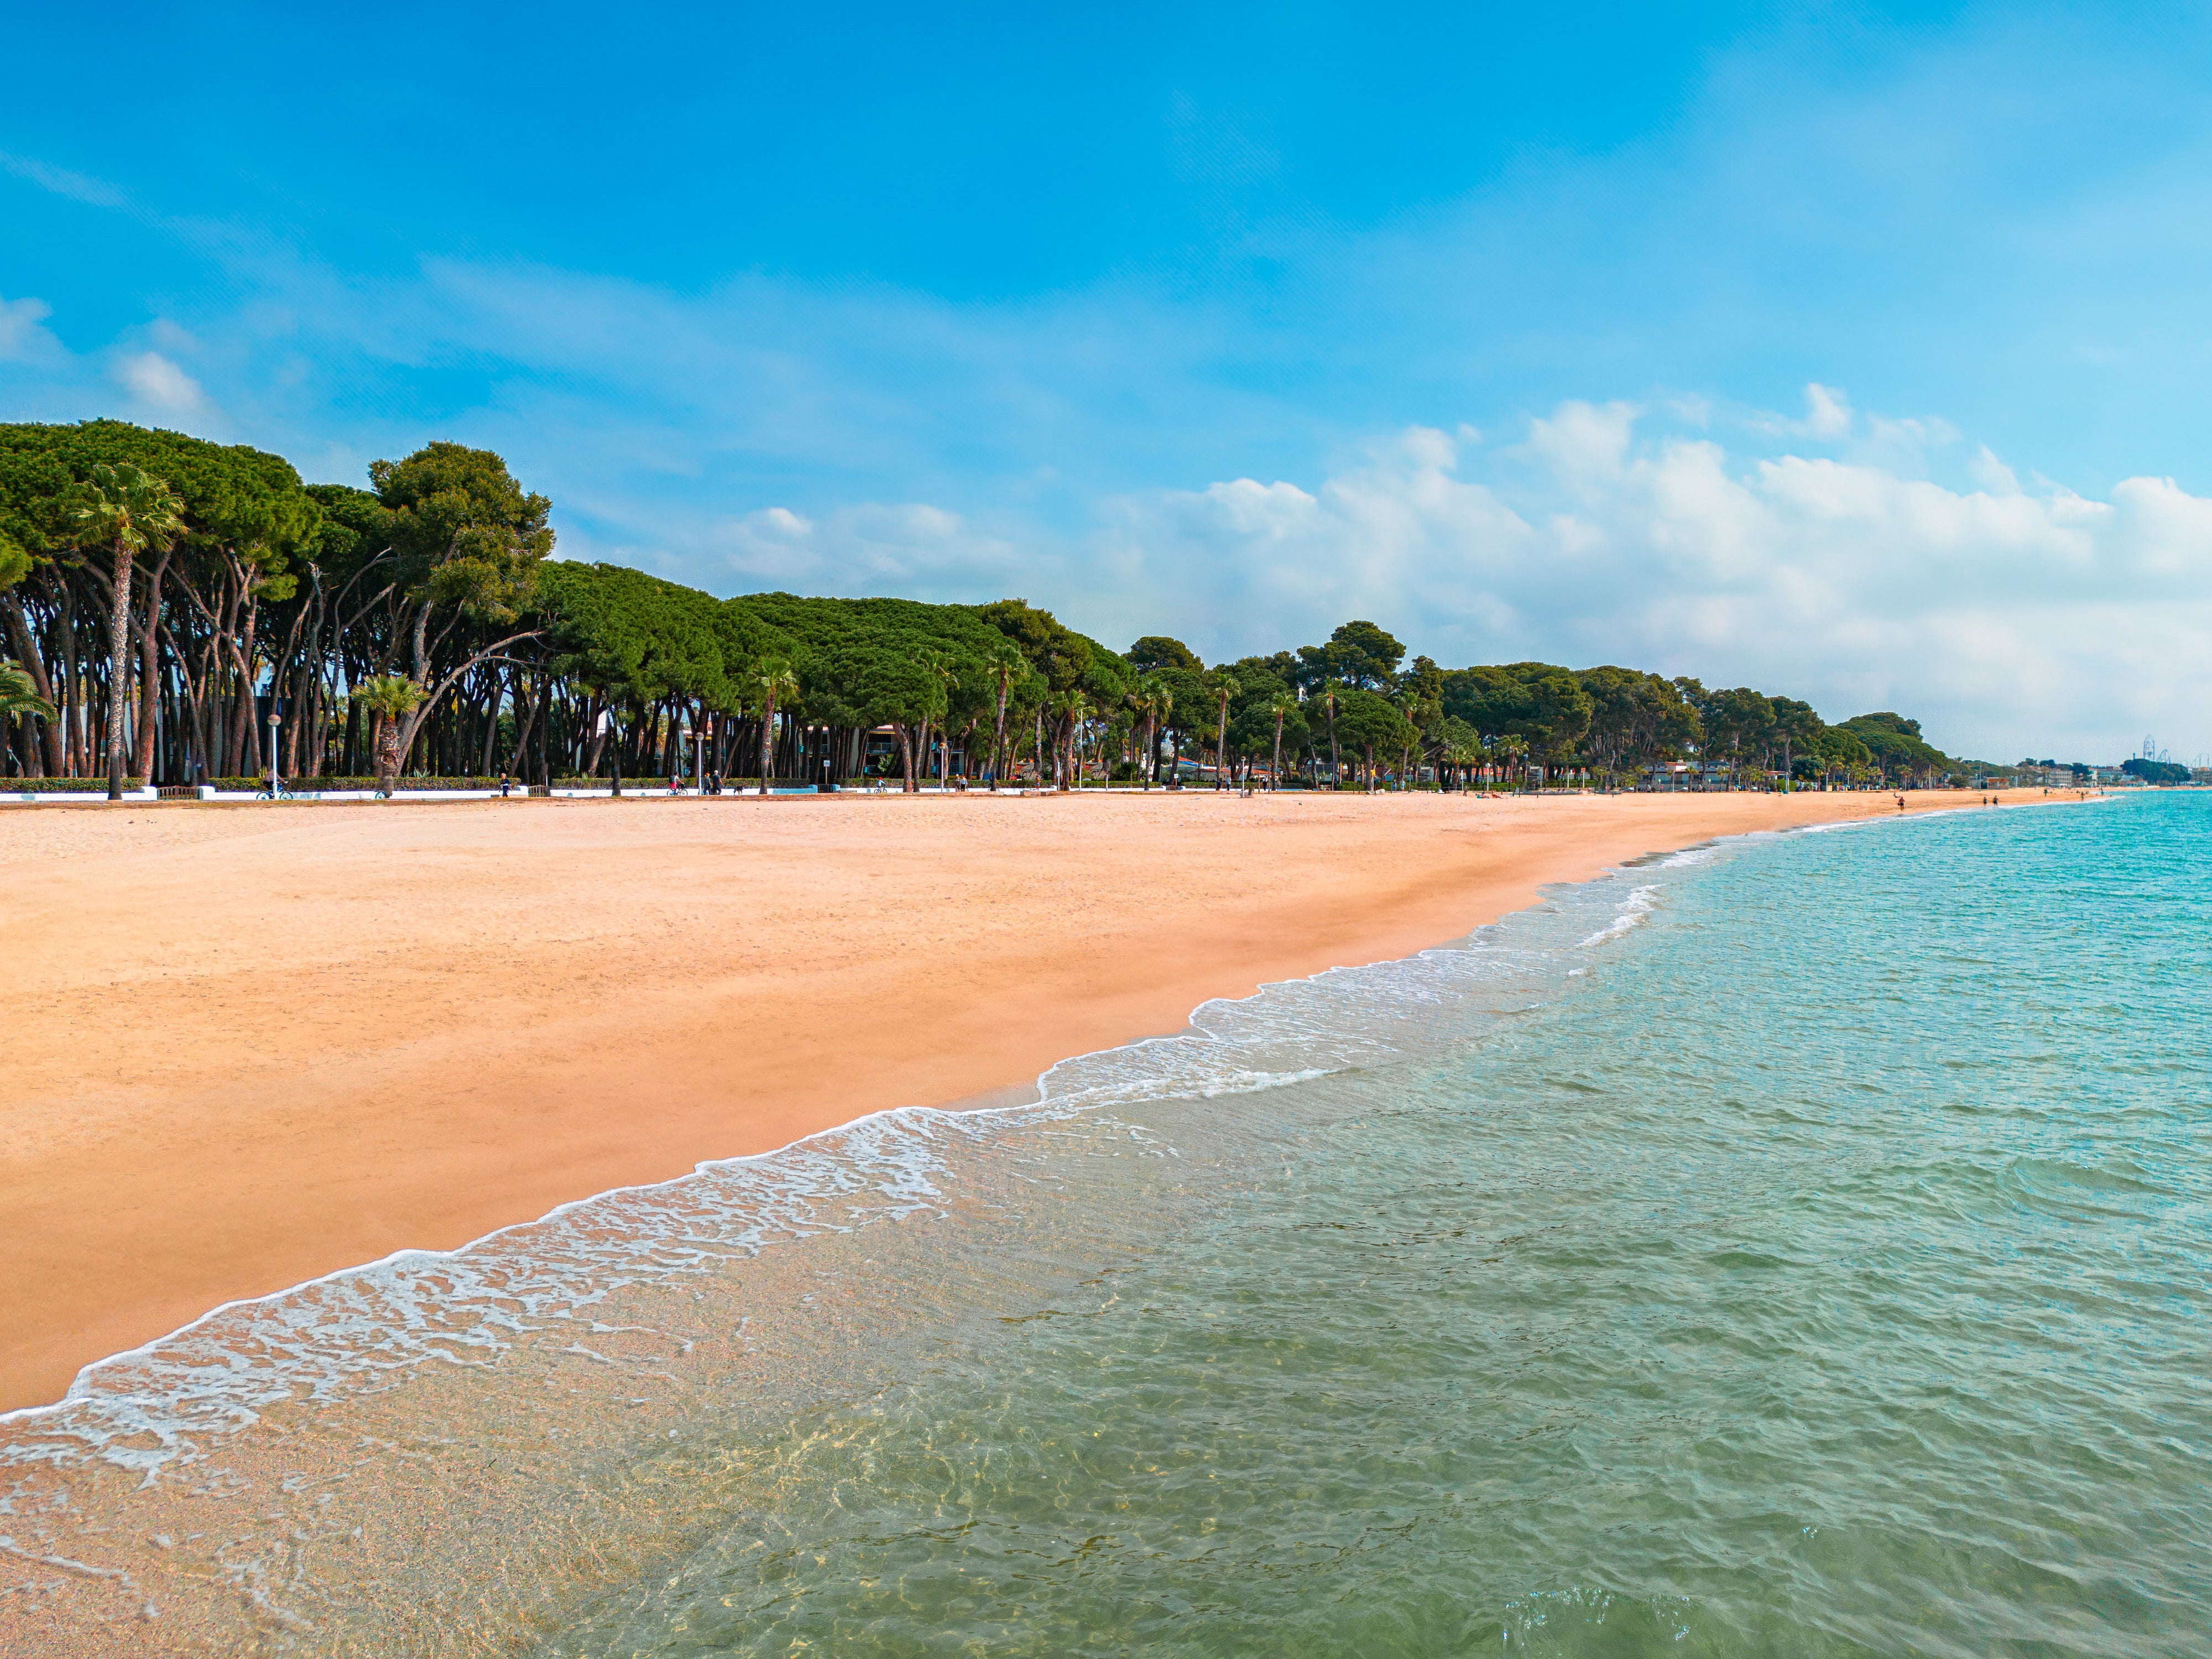 If it’s some basking on the beach you’re after, you’ll be spoilt for choice with 26 Blue Flag beaches, like Vilafortuny beach in Cambrils